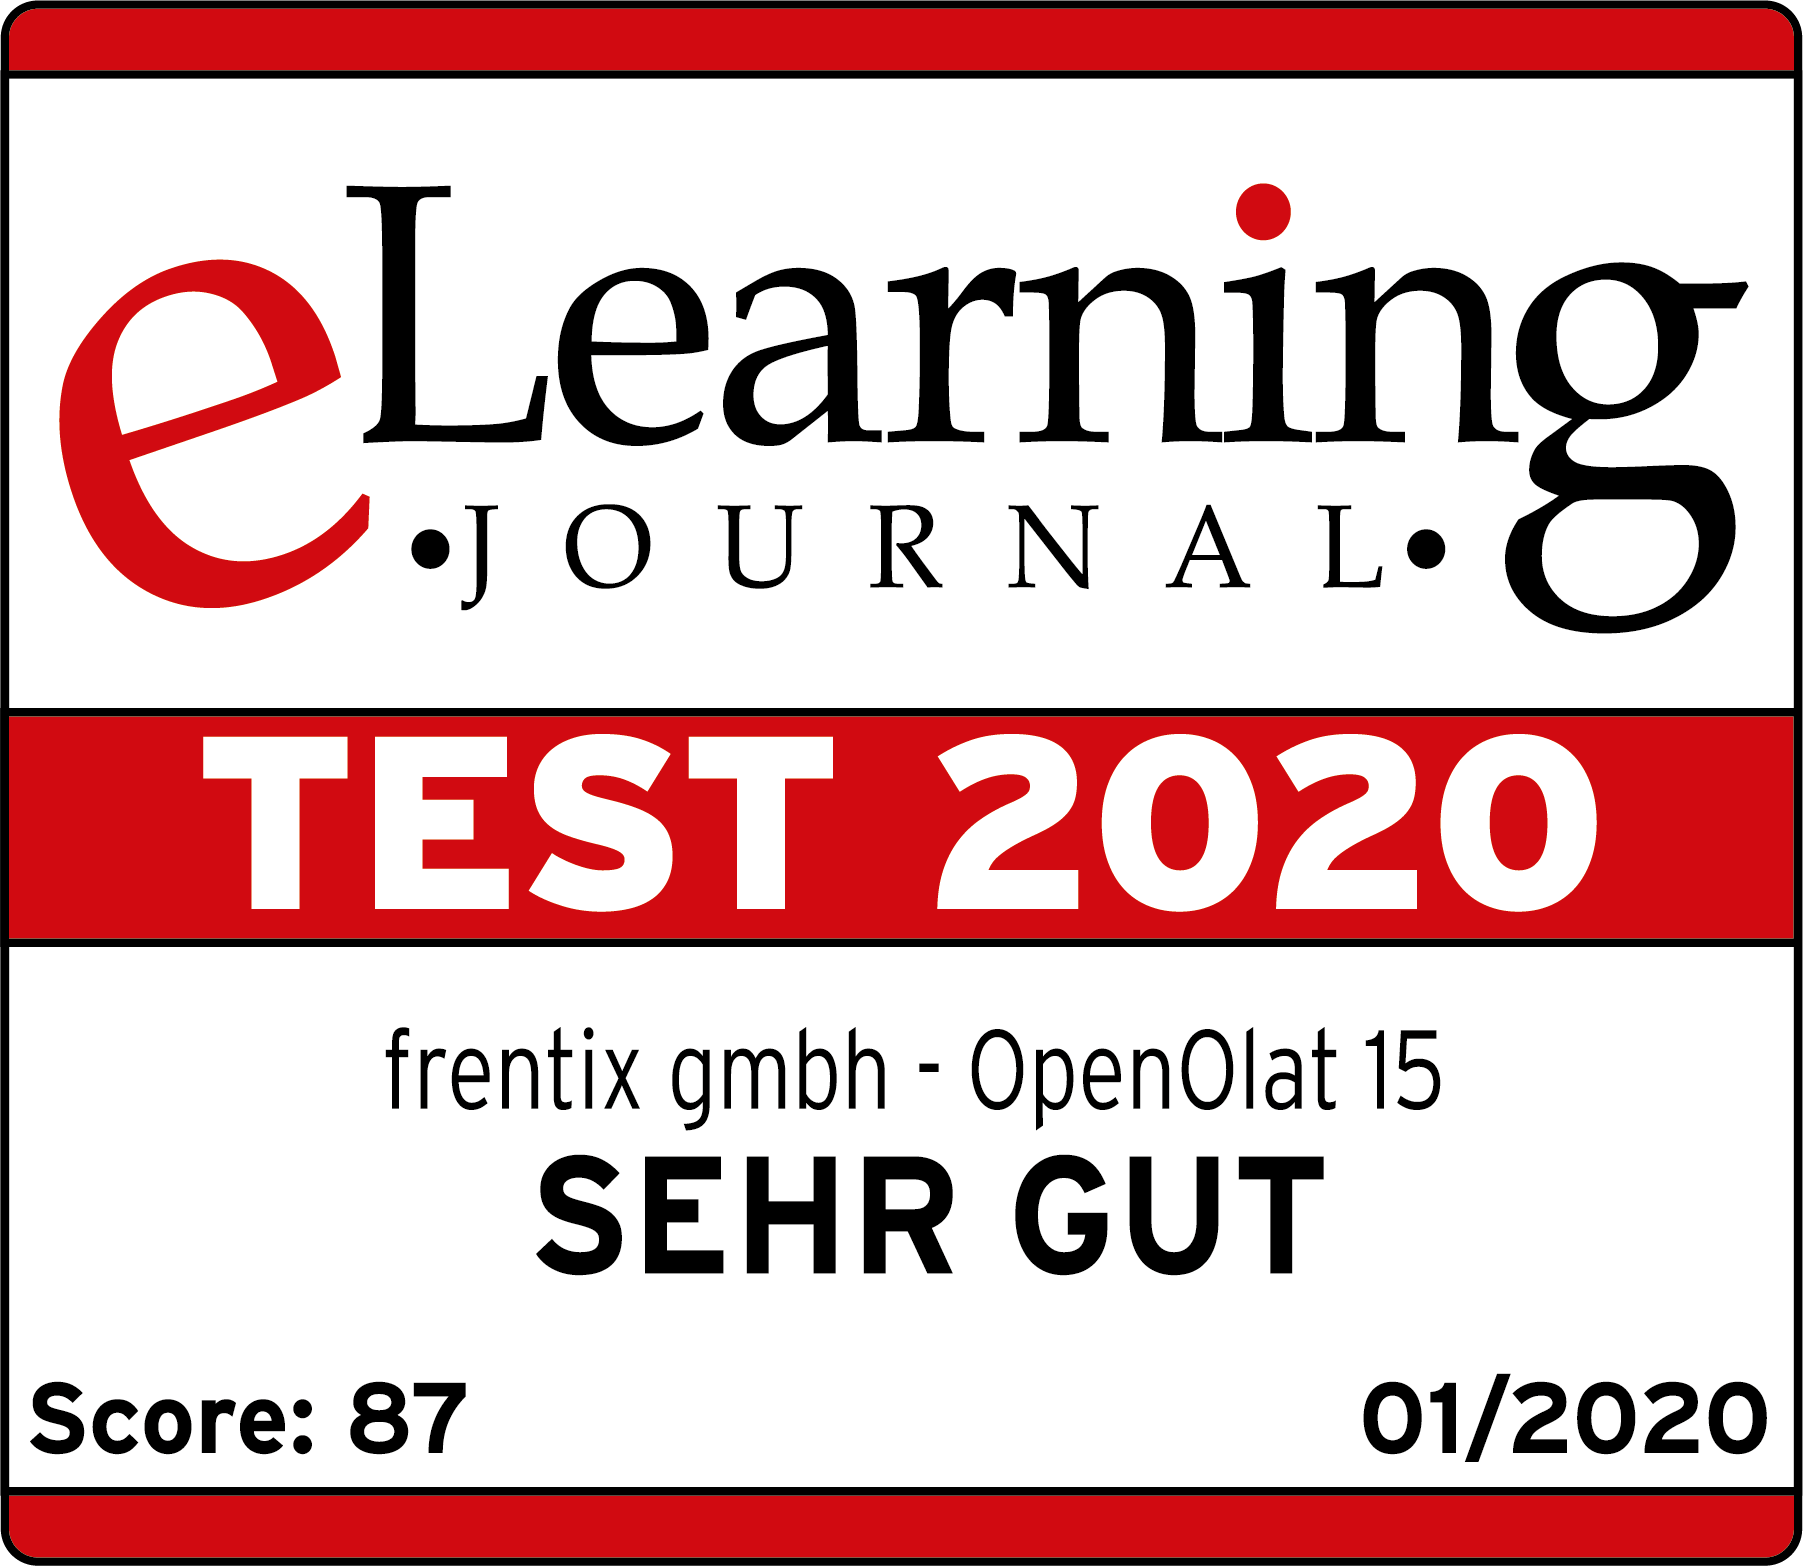 The OpenOlat LMS got a high score in the e-learning journal ranking